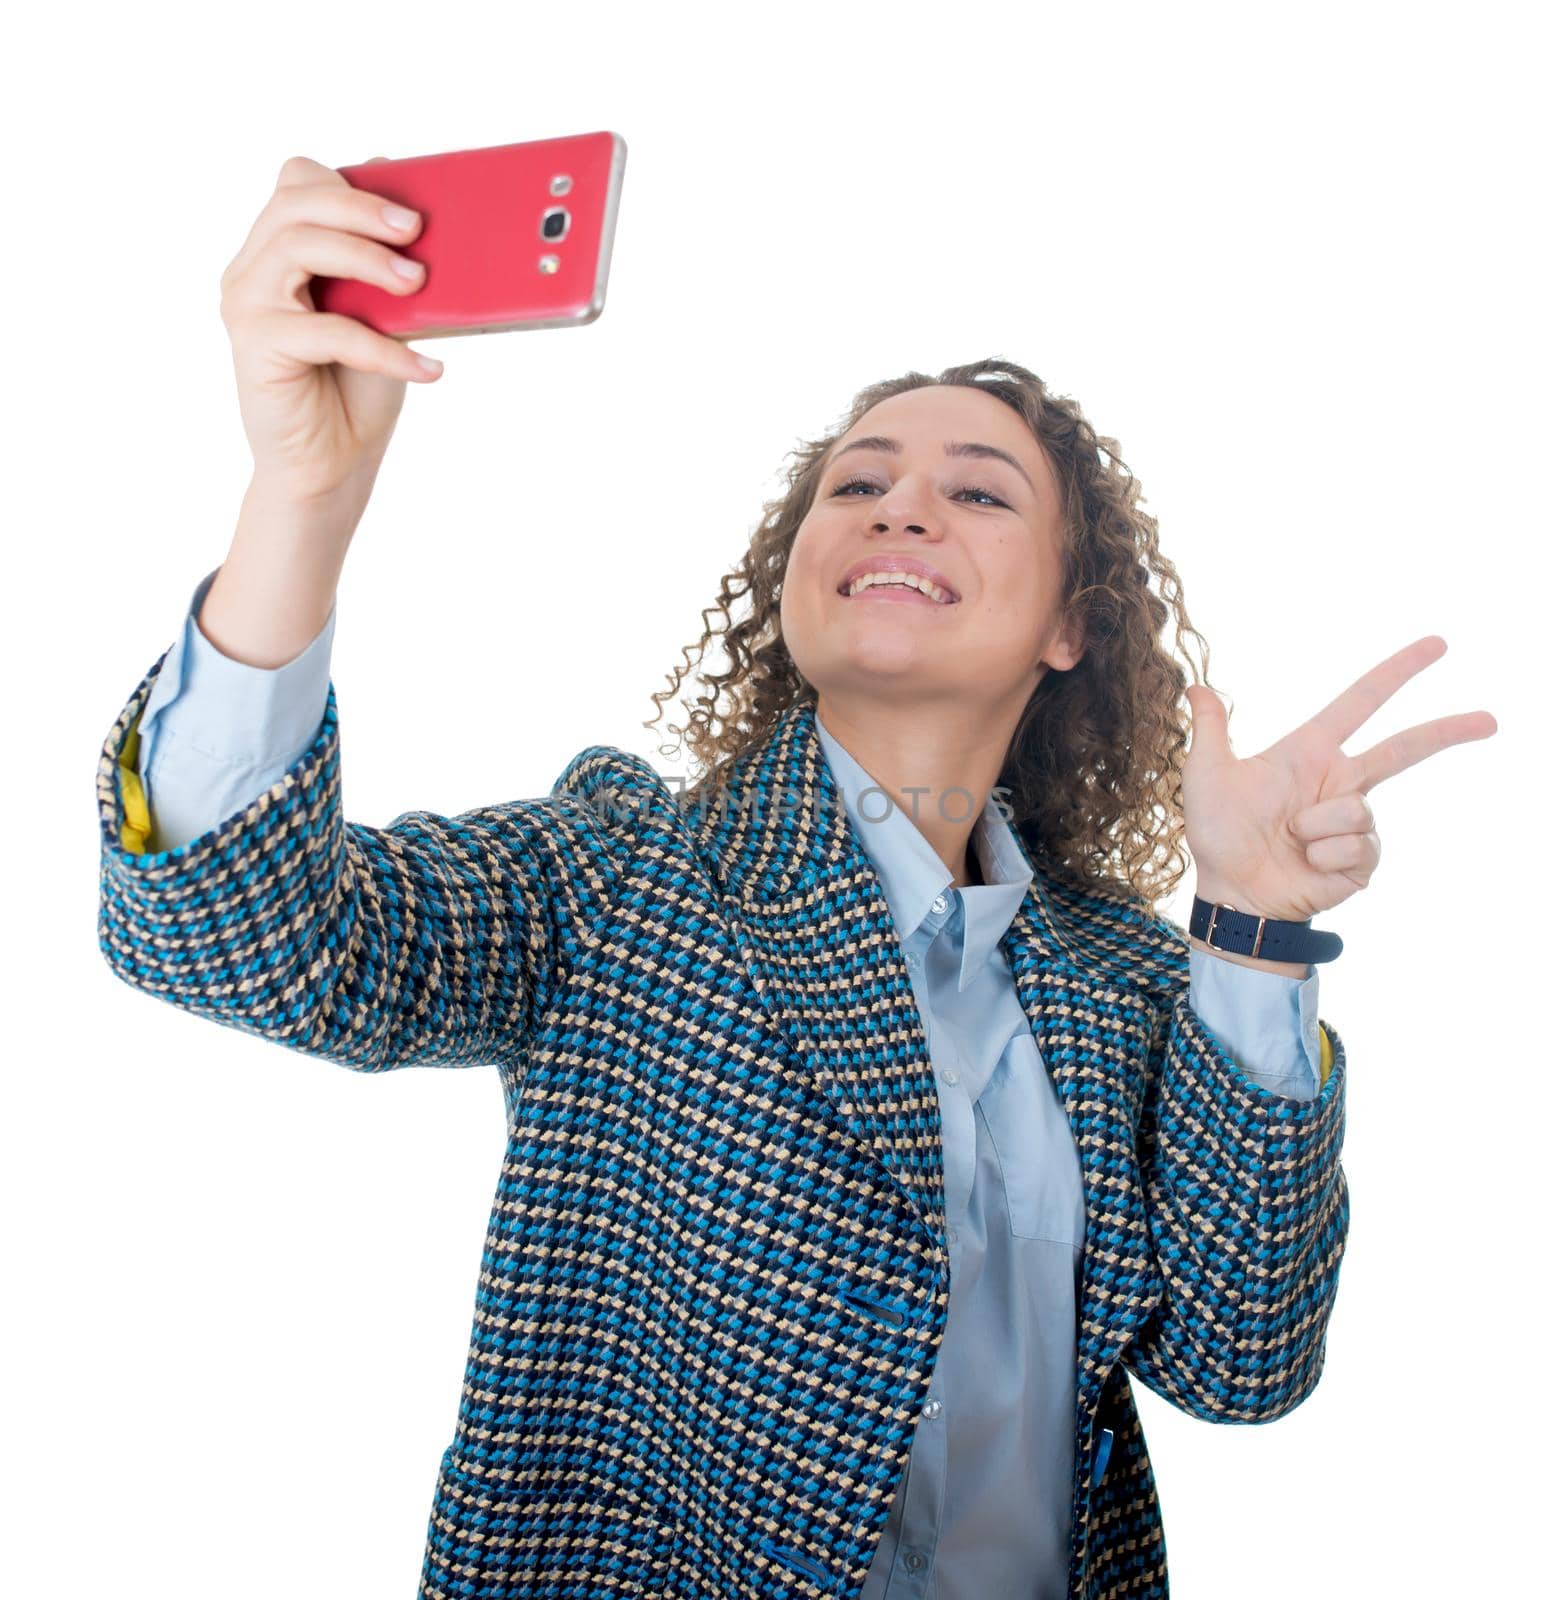 Close up portrait of a cute lovely woman taking selfie and showing peace sign with fingers over white background